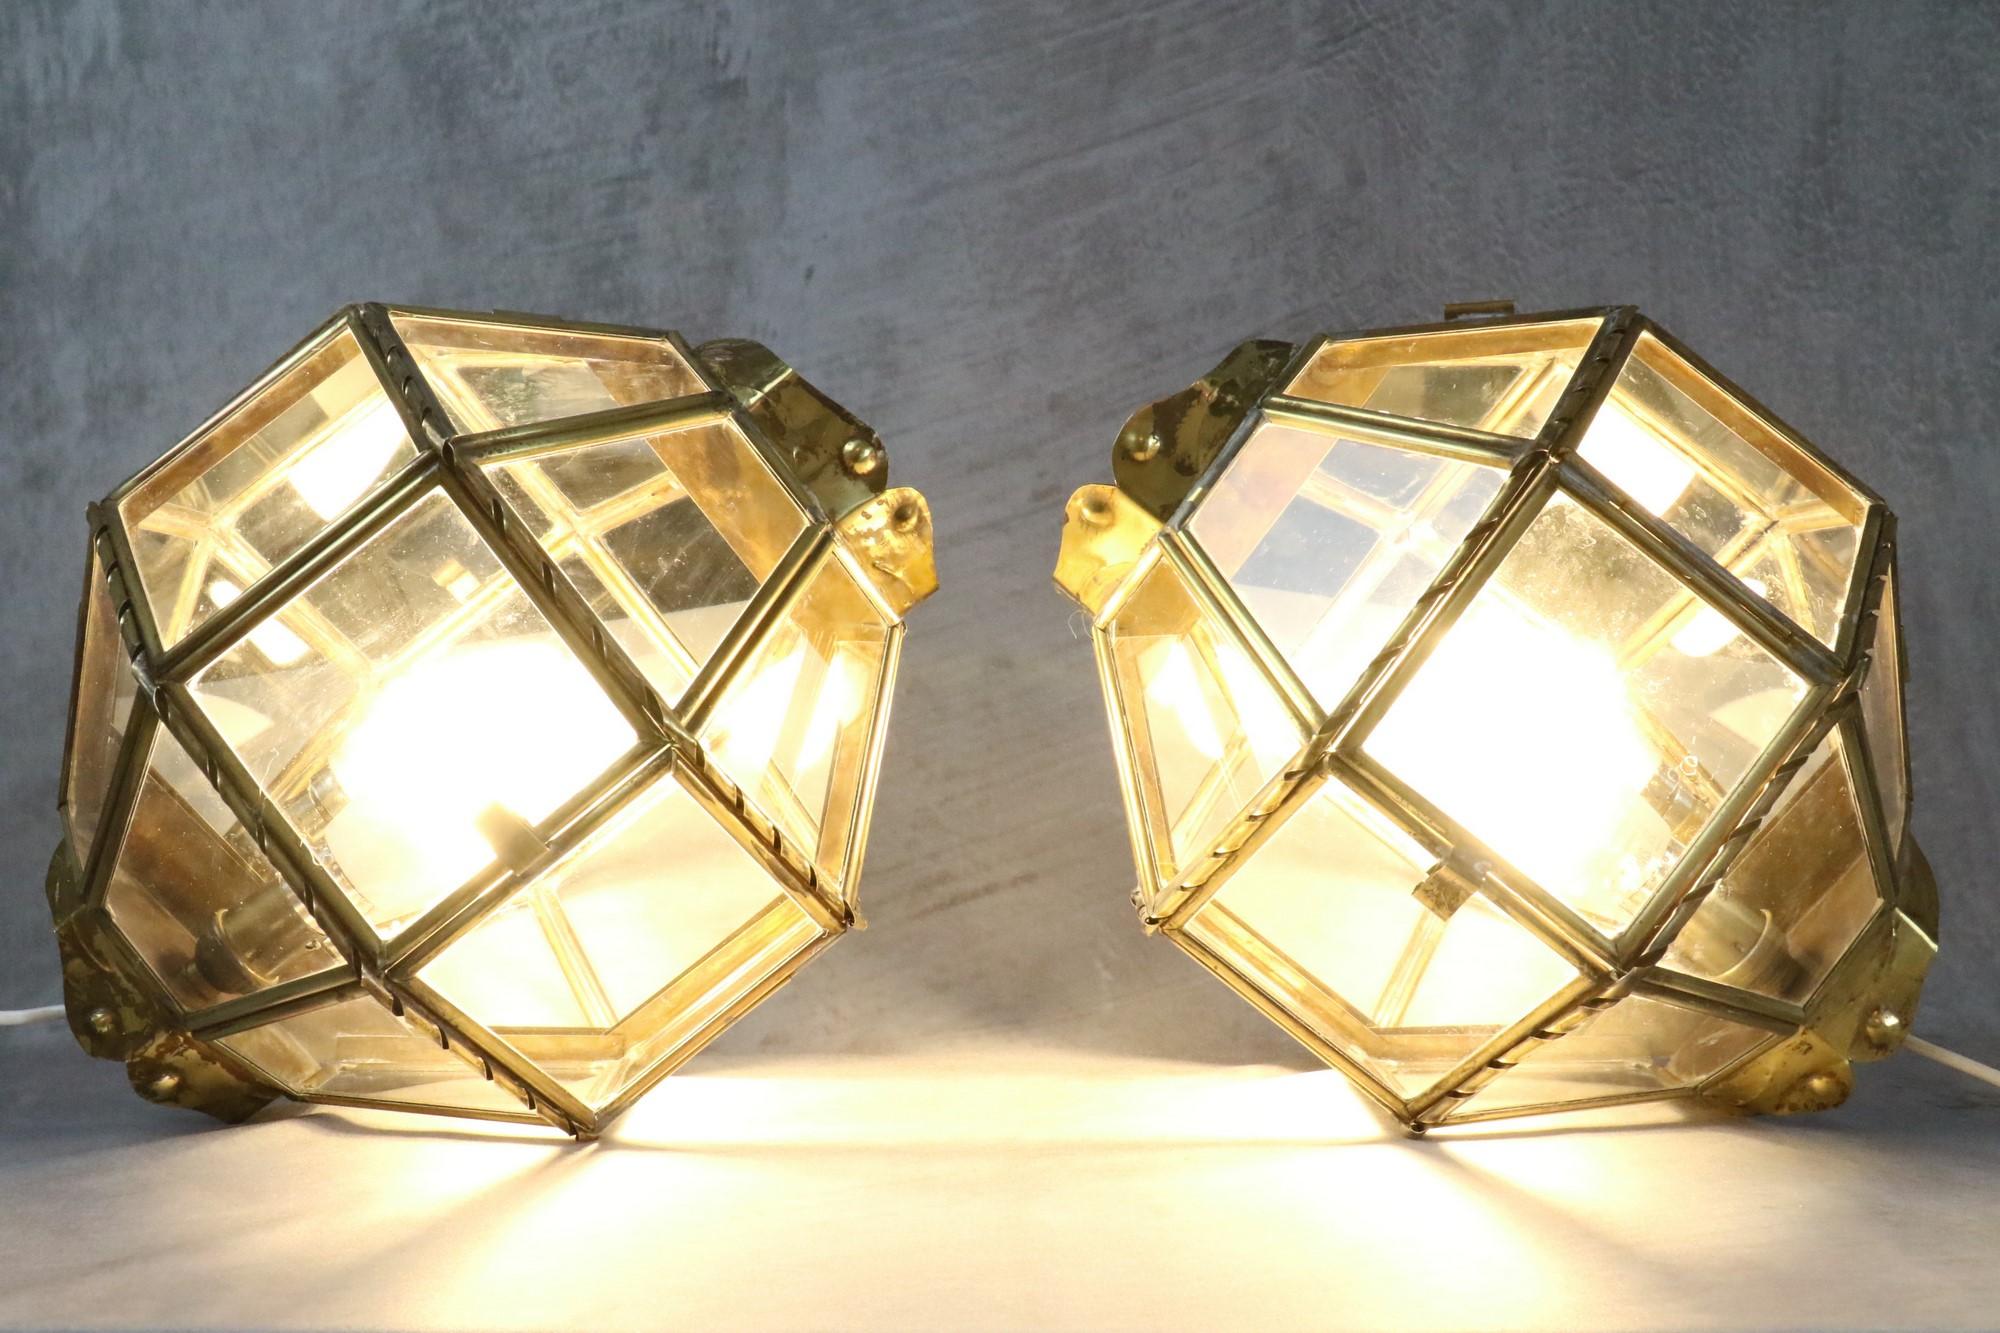 Brass and Glass Pair of Vintage Handcrafted Wall Lamps, 1940s, France 6